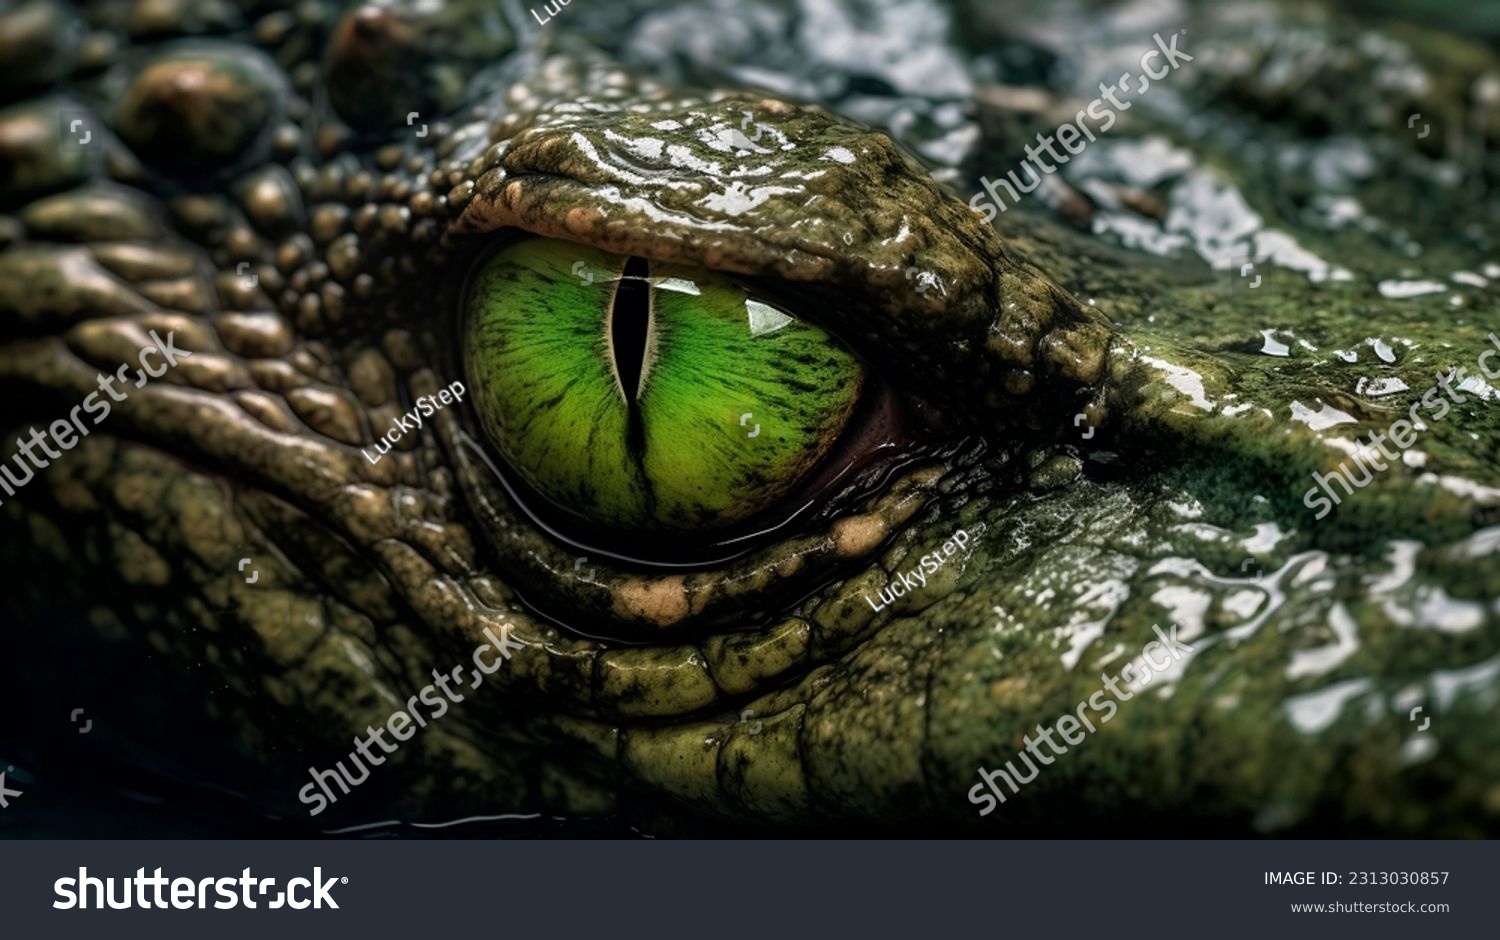 Wildlife crocodile green underwater photography. Open eye reptile teeth. Dangerous animal river mangrove forest close up photo #2313030857